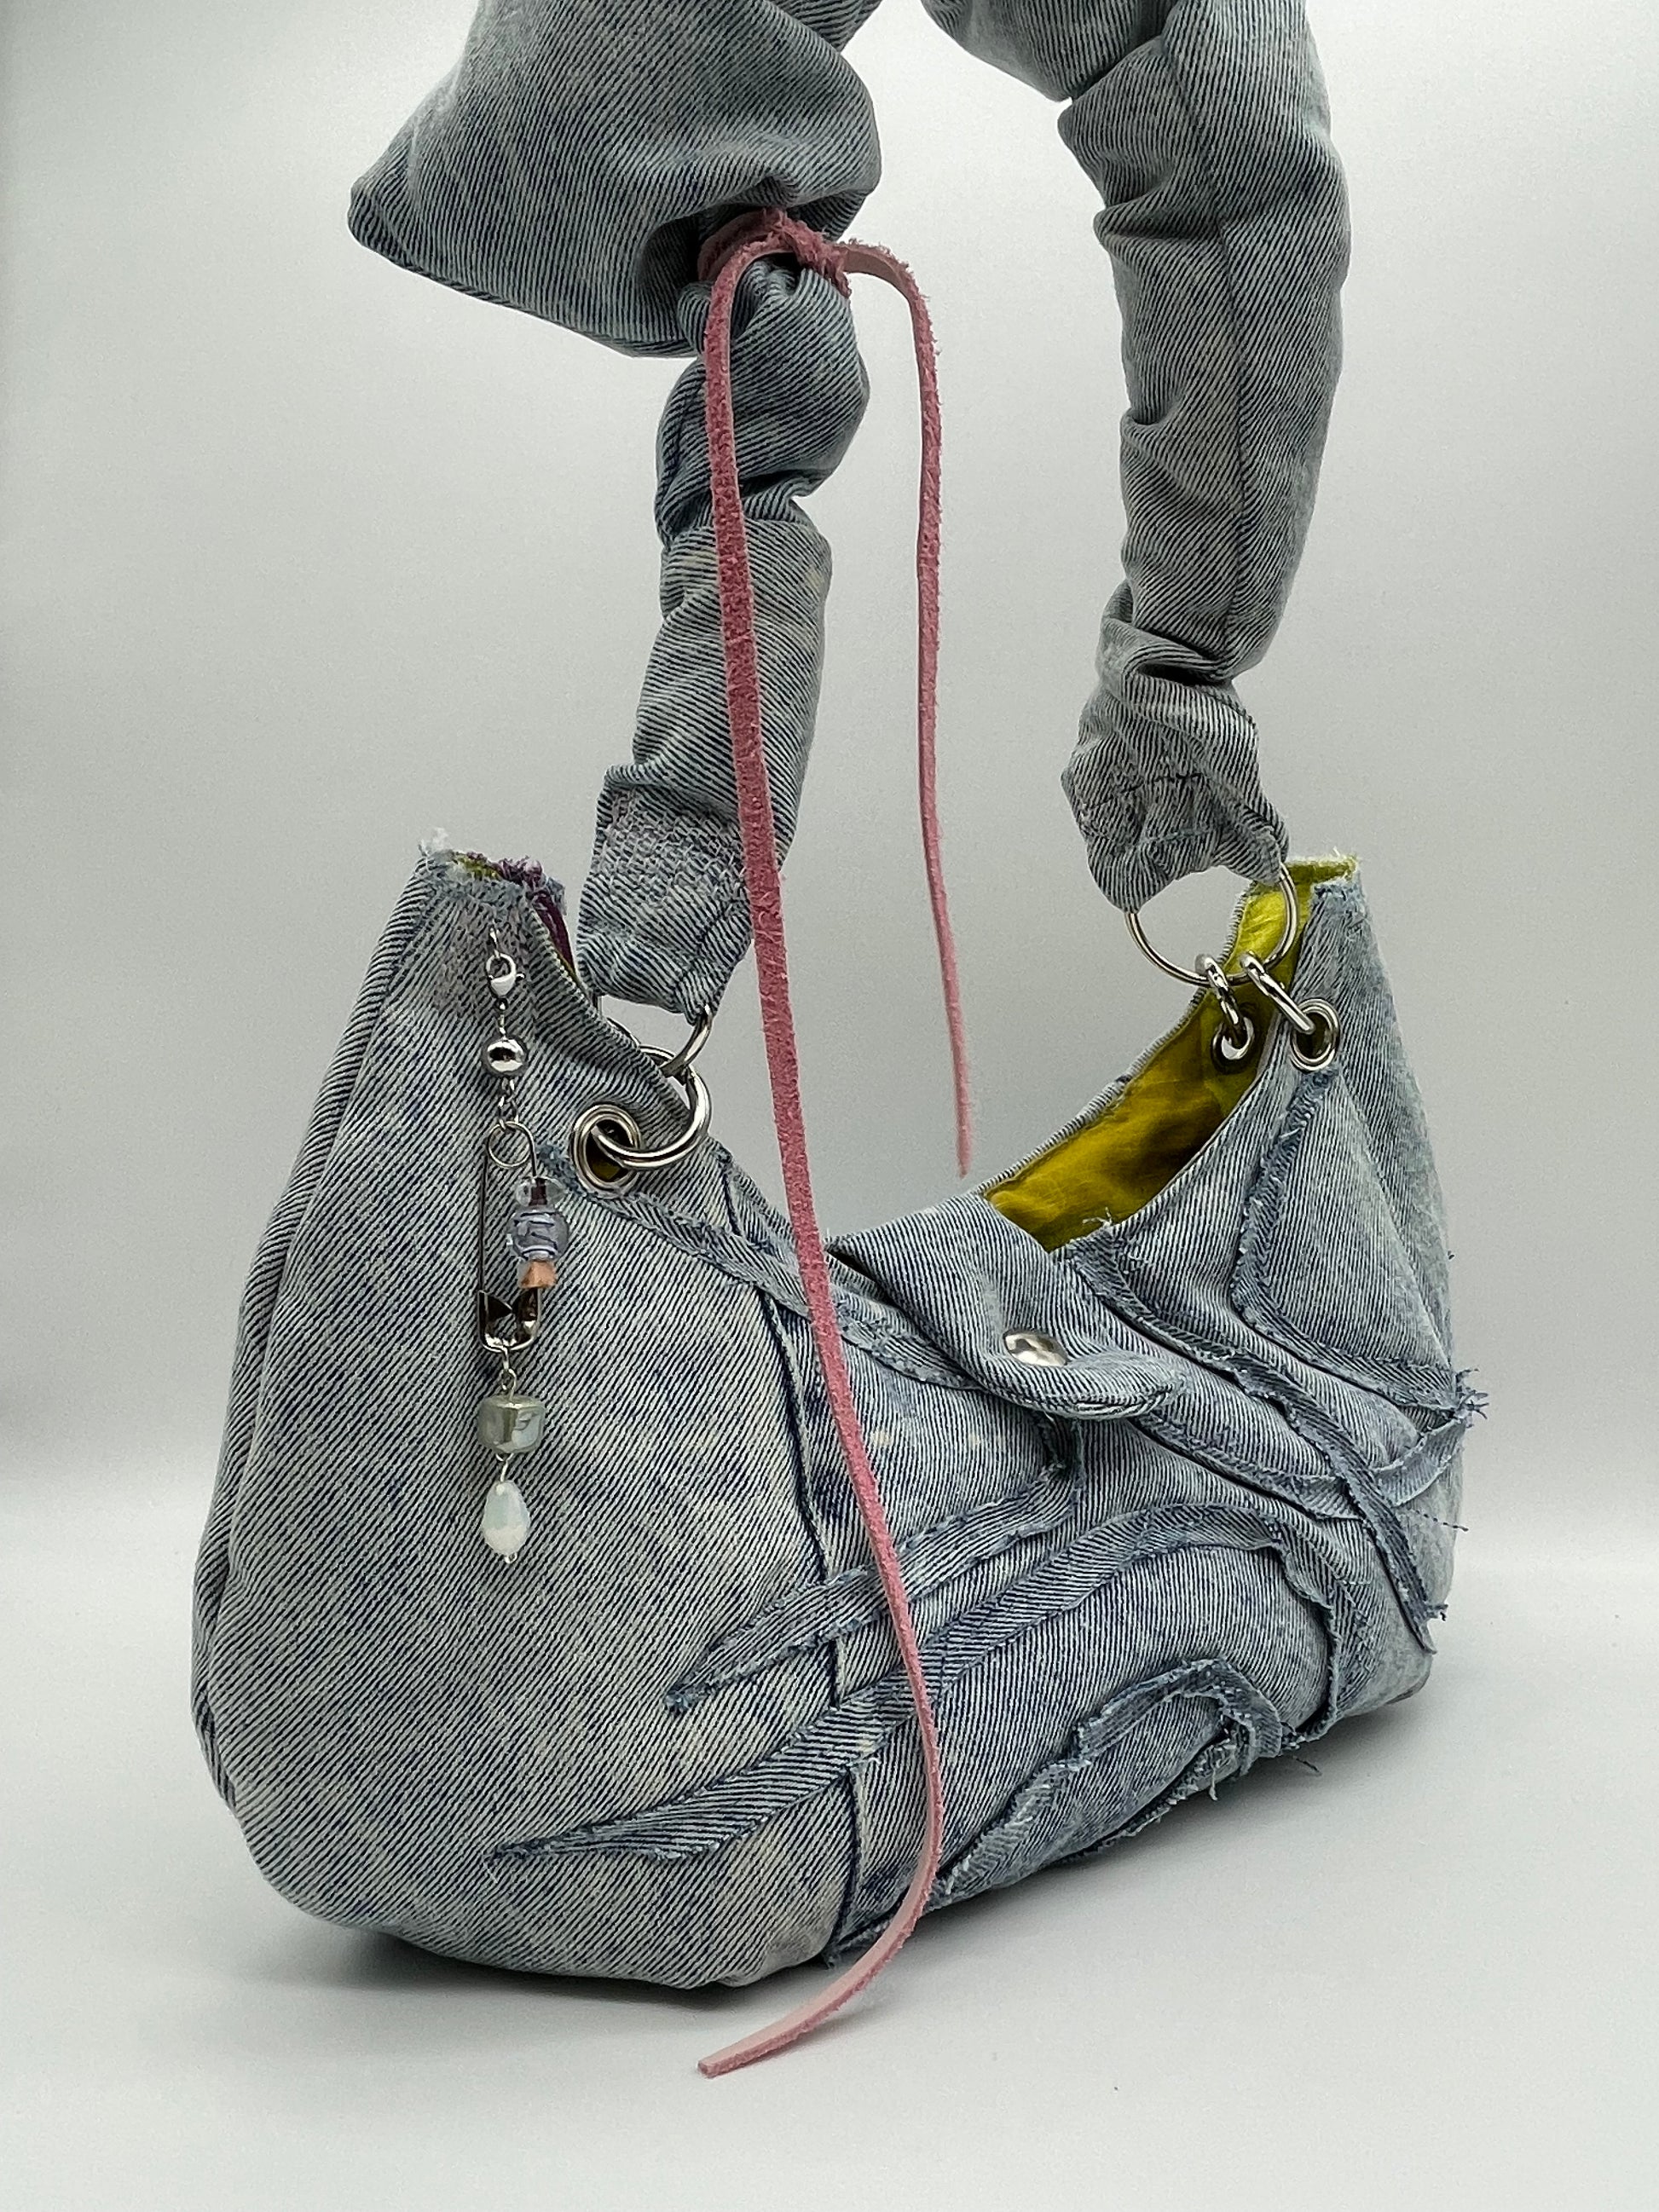 Upcycling bag washed out denim bag beads chain jeans bag scrunchy wavey padded pink leather